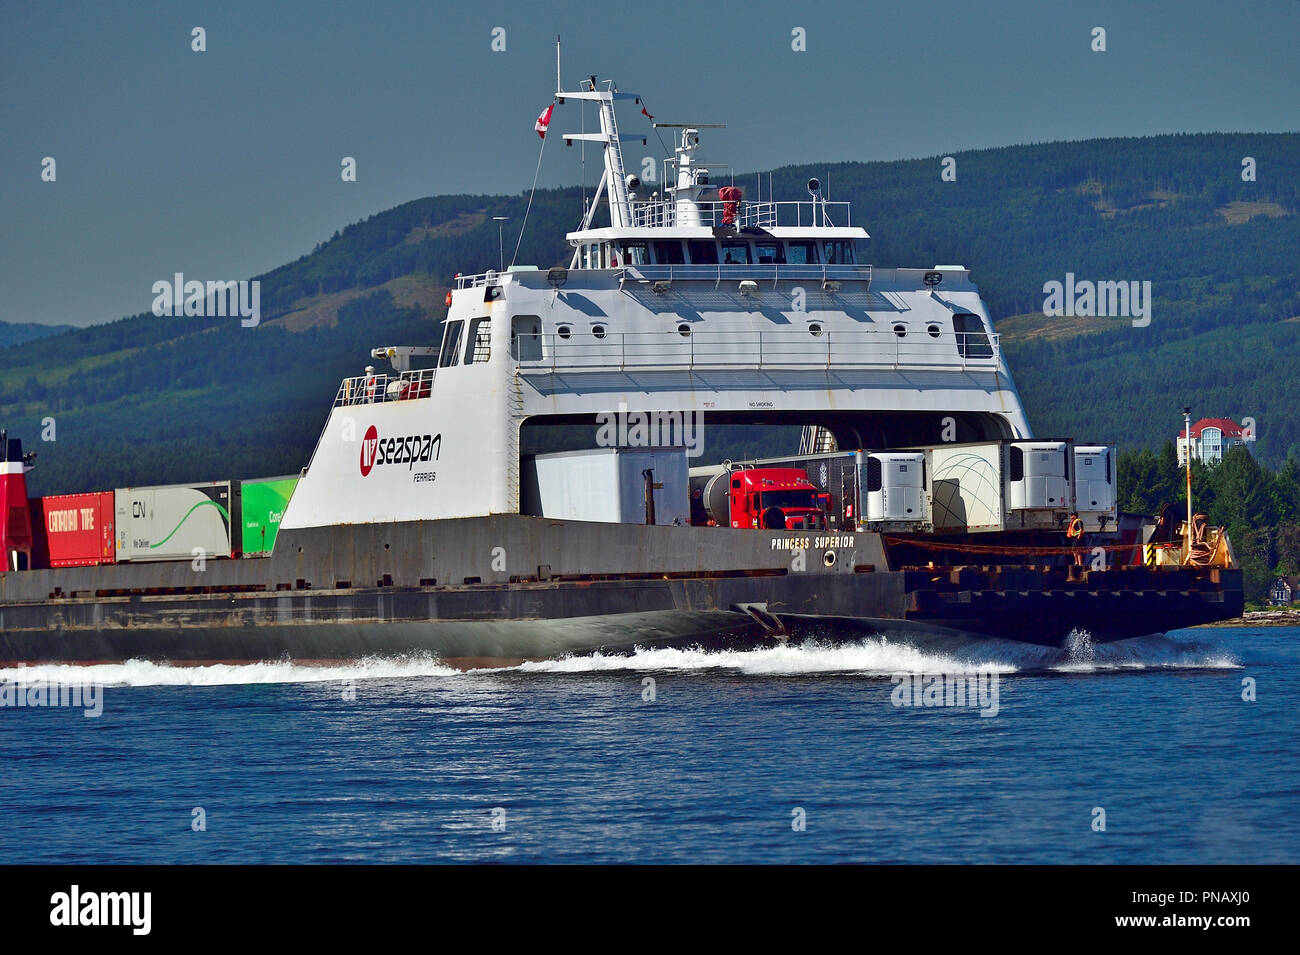 A front view of a large ferry boat loaded with tractor trailers full of freight traveling out of the harbour at the city of Nanaimo on vancouver Islan Stock Photo